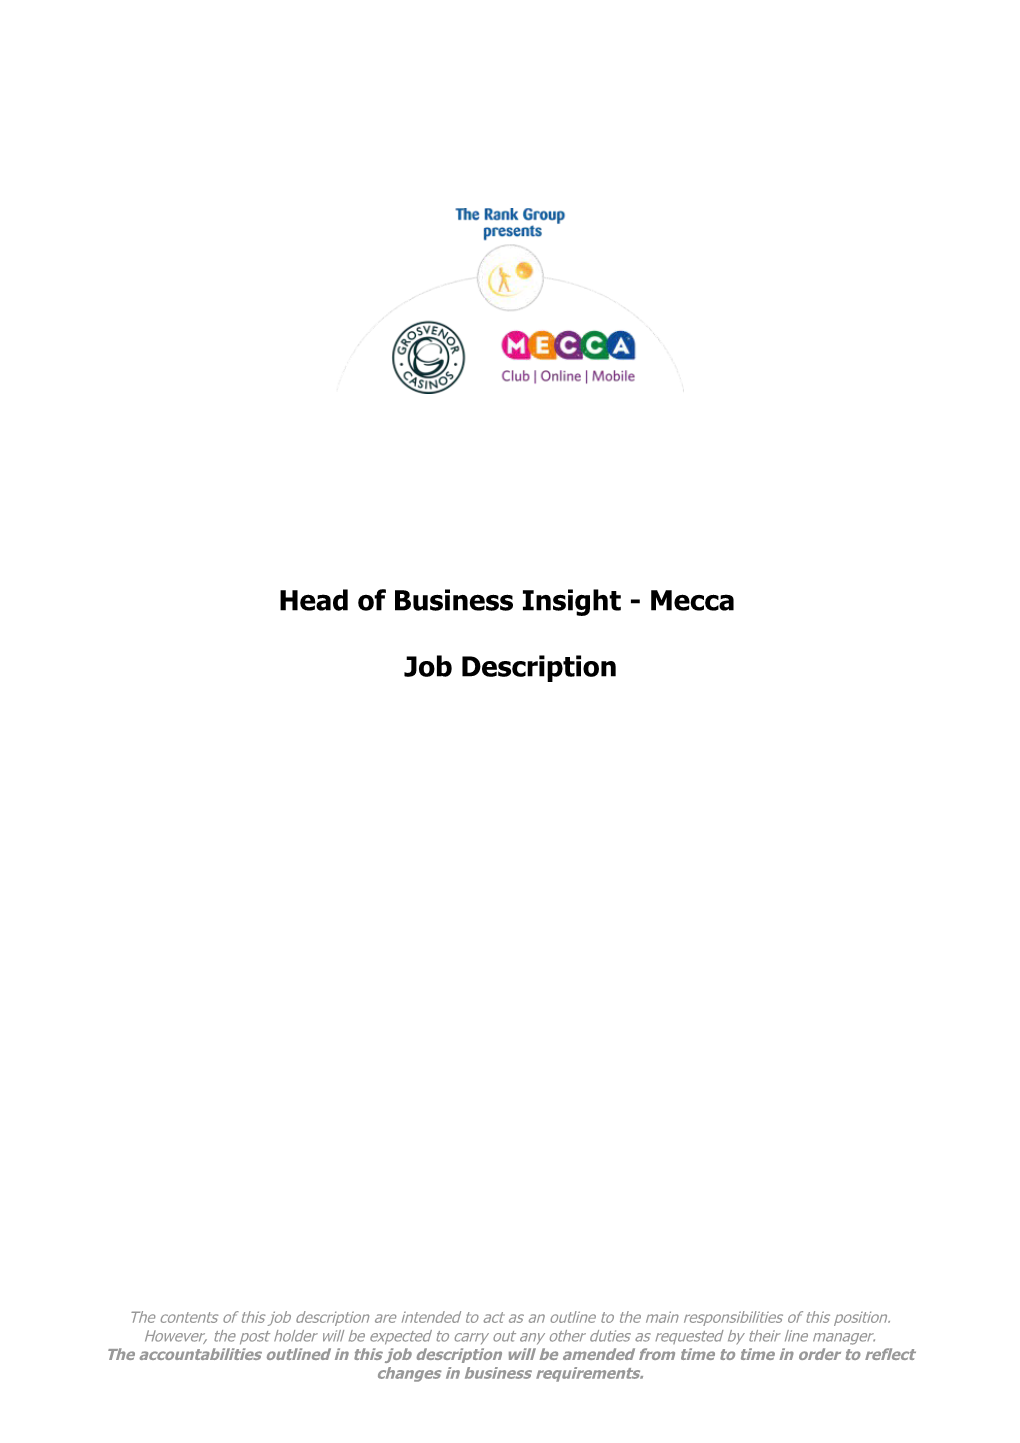 Head of Business Insight - Mecca